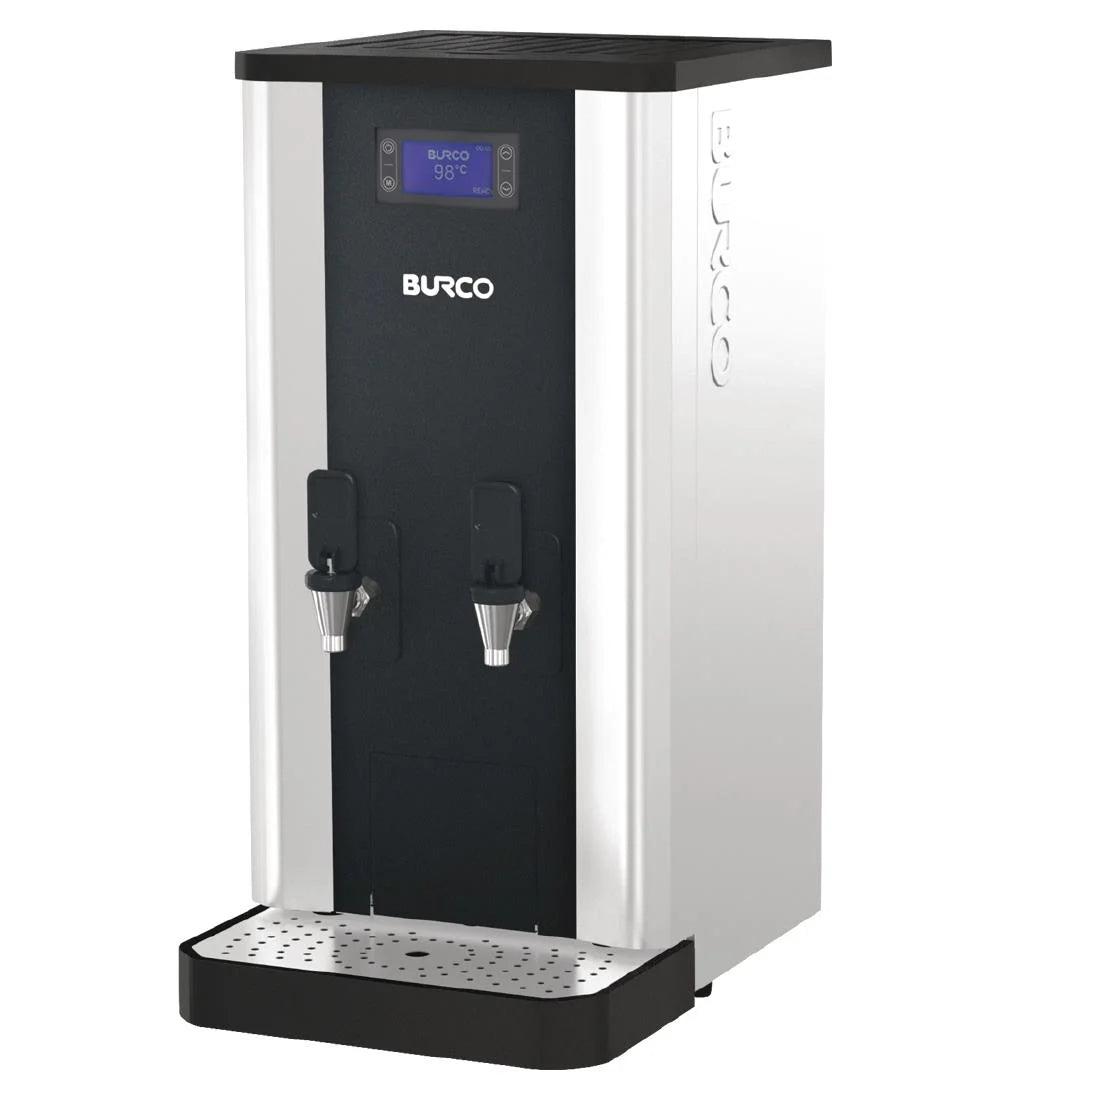 Burco 20Ltr Auto Fill Twin Tap Water Boiler with Filtration 069795.Product Ref:00573.MODEL:069795.🚚 3-5 Days Delivery